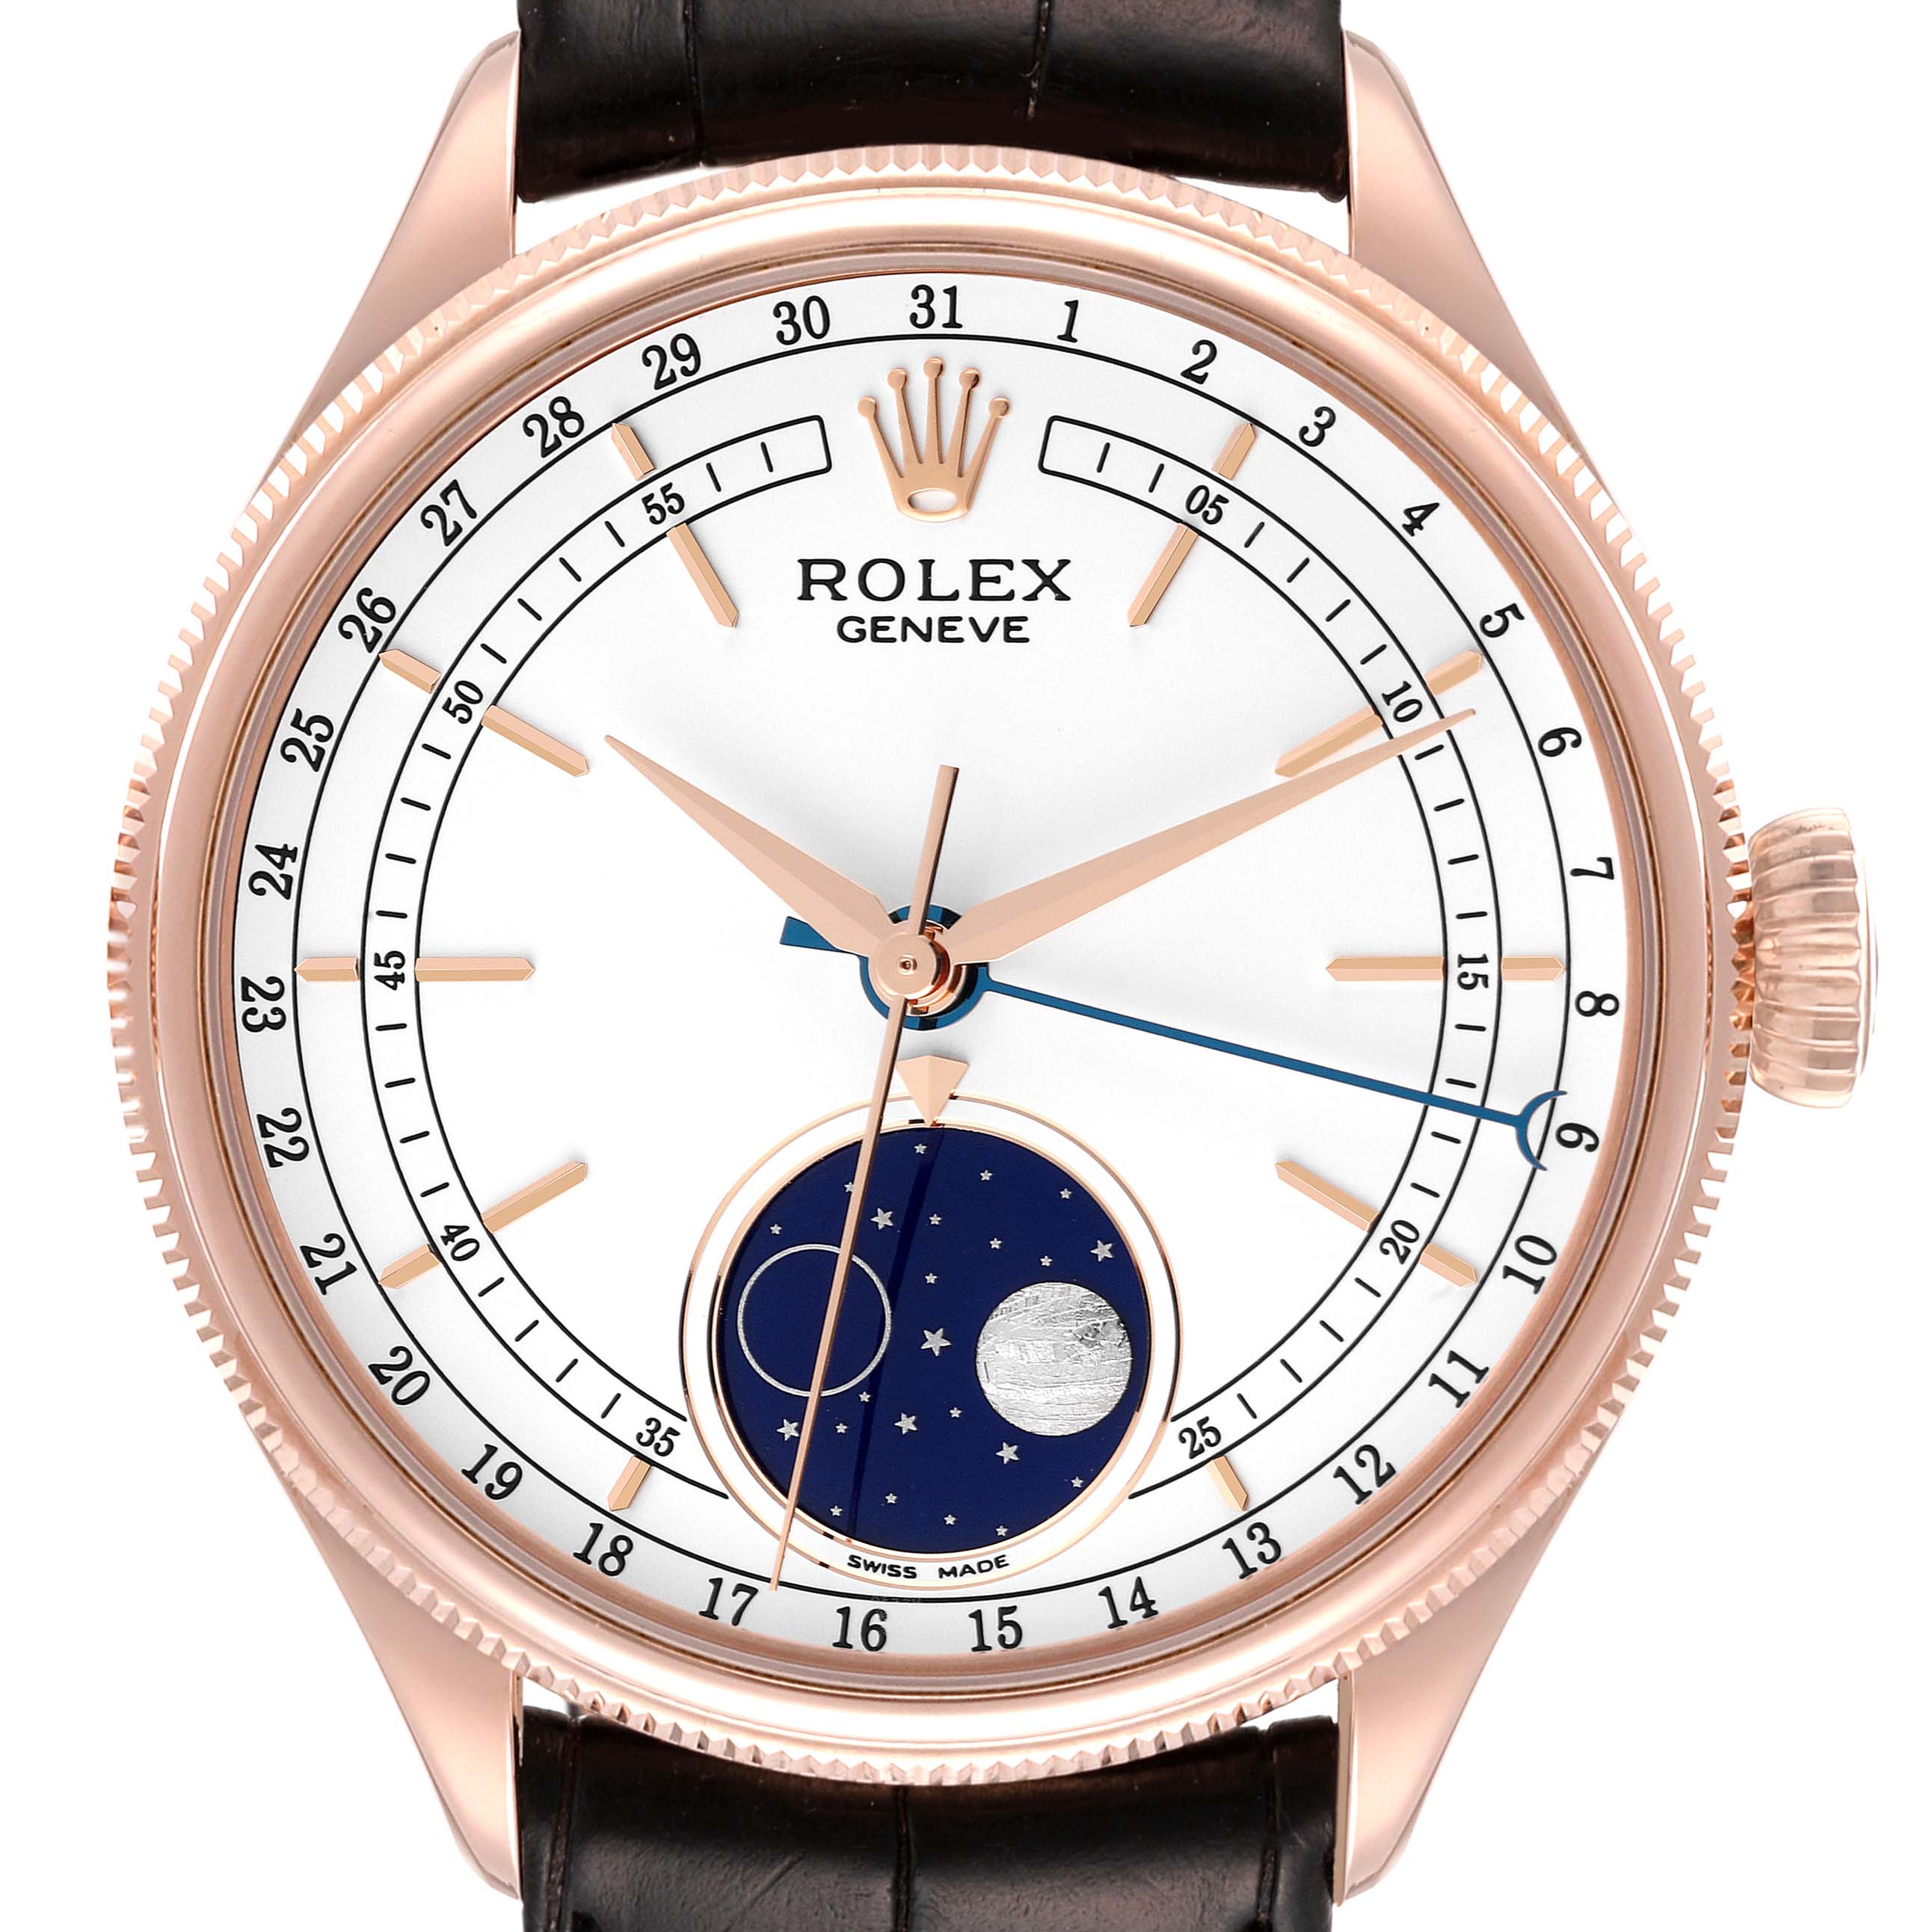 Rolex Cellini Moonphase Everose Gold Automatic Watch 50535 | SwissWatchExpo